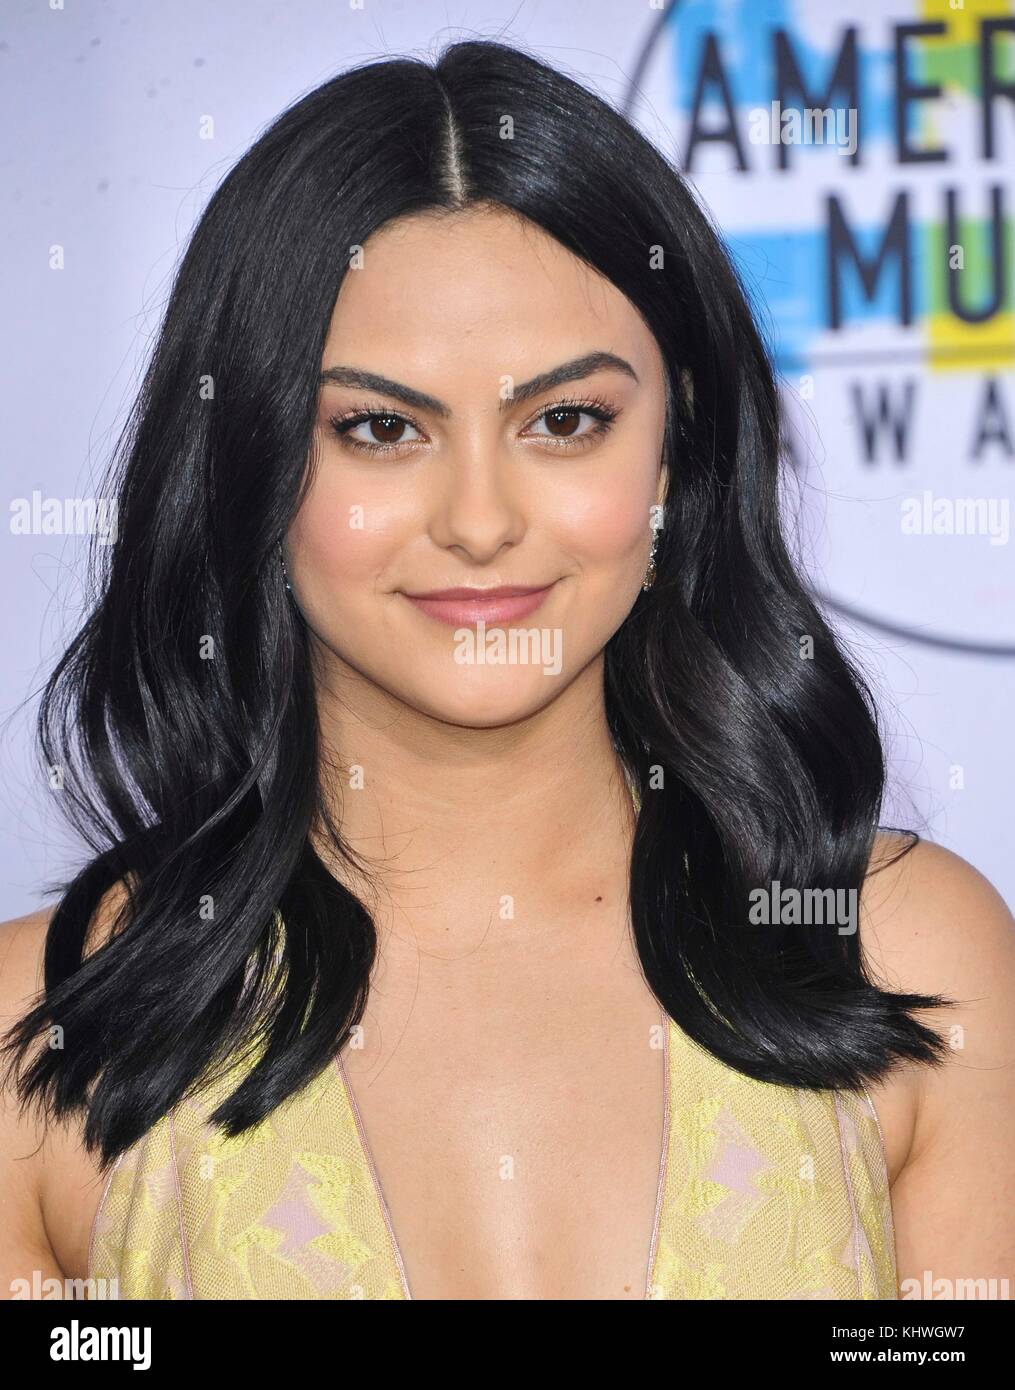 Los Angeles, CA, USA. 19th Nov, 2017. Camila Mendes at arrivals for 2017 American Music Awards (AMAs) - Arrivals, Microsoft Theater, Los Angeles, CA November 19, 2017. Credit: Elizabeth Goodenough/Everett Collection/Alamy Live News Stock Photo